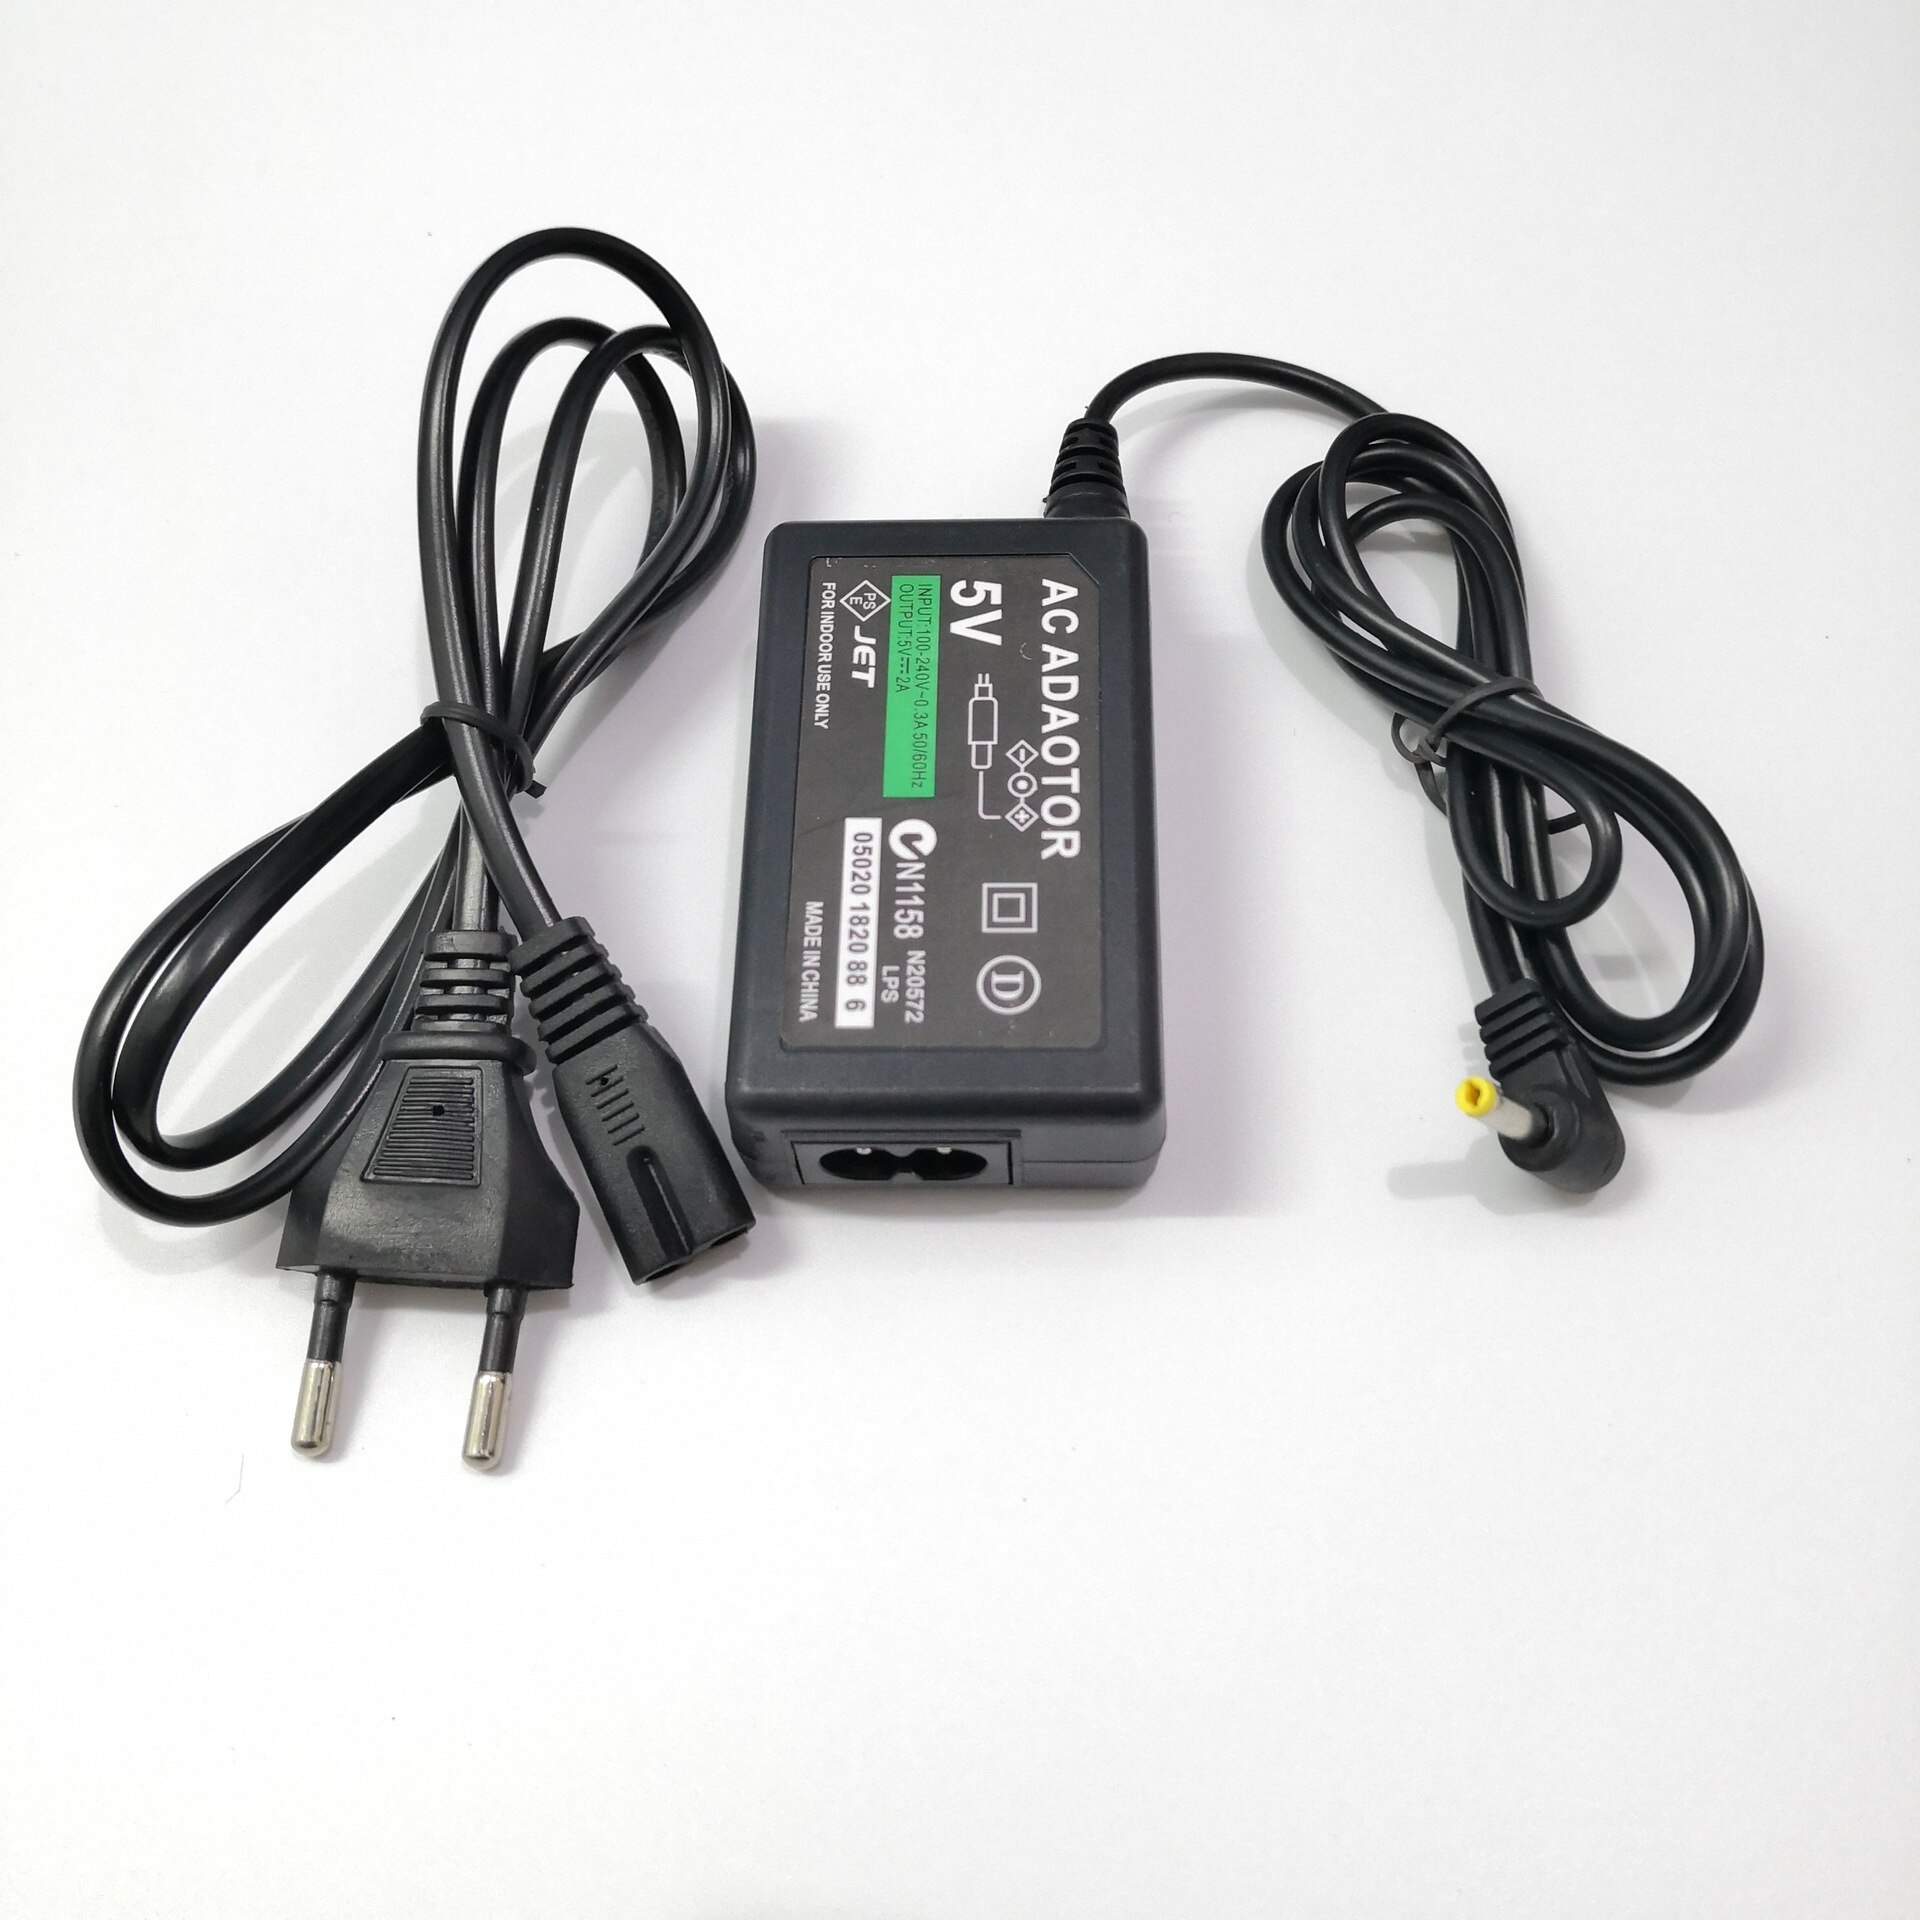 5V Home Wall Charger Power Supply AC Adapter for Sony PlayStation Portable PSP 1000 2000 3000 Charging Cable Cord